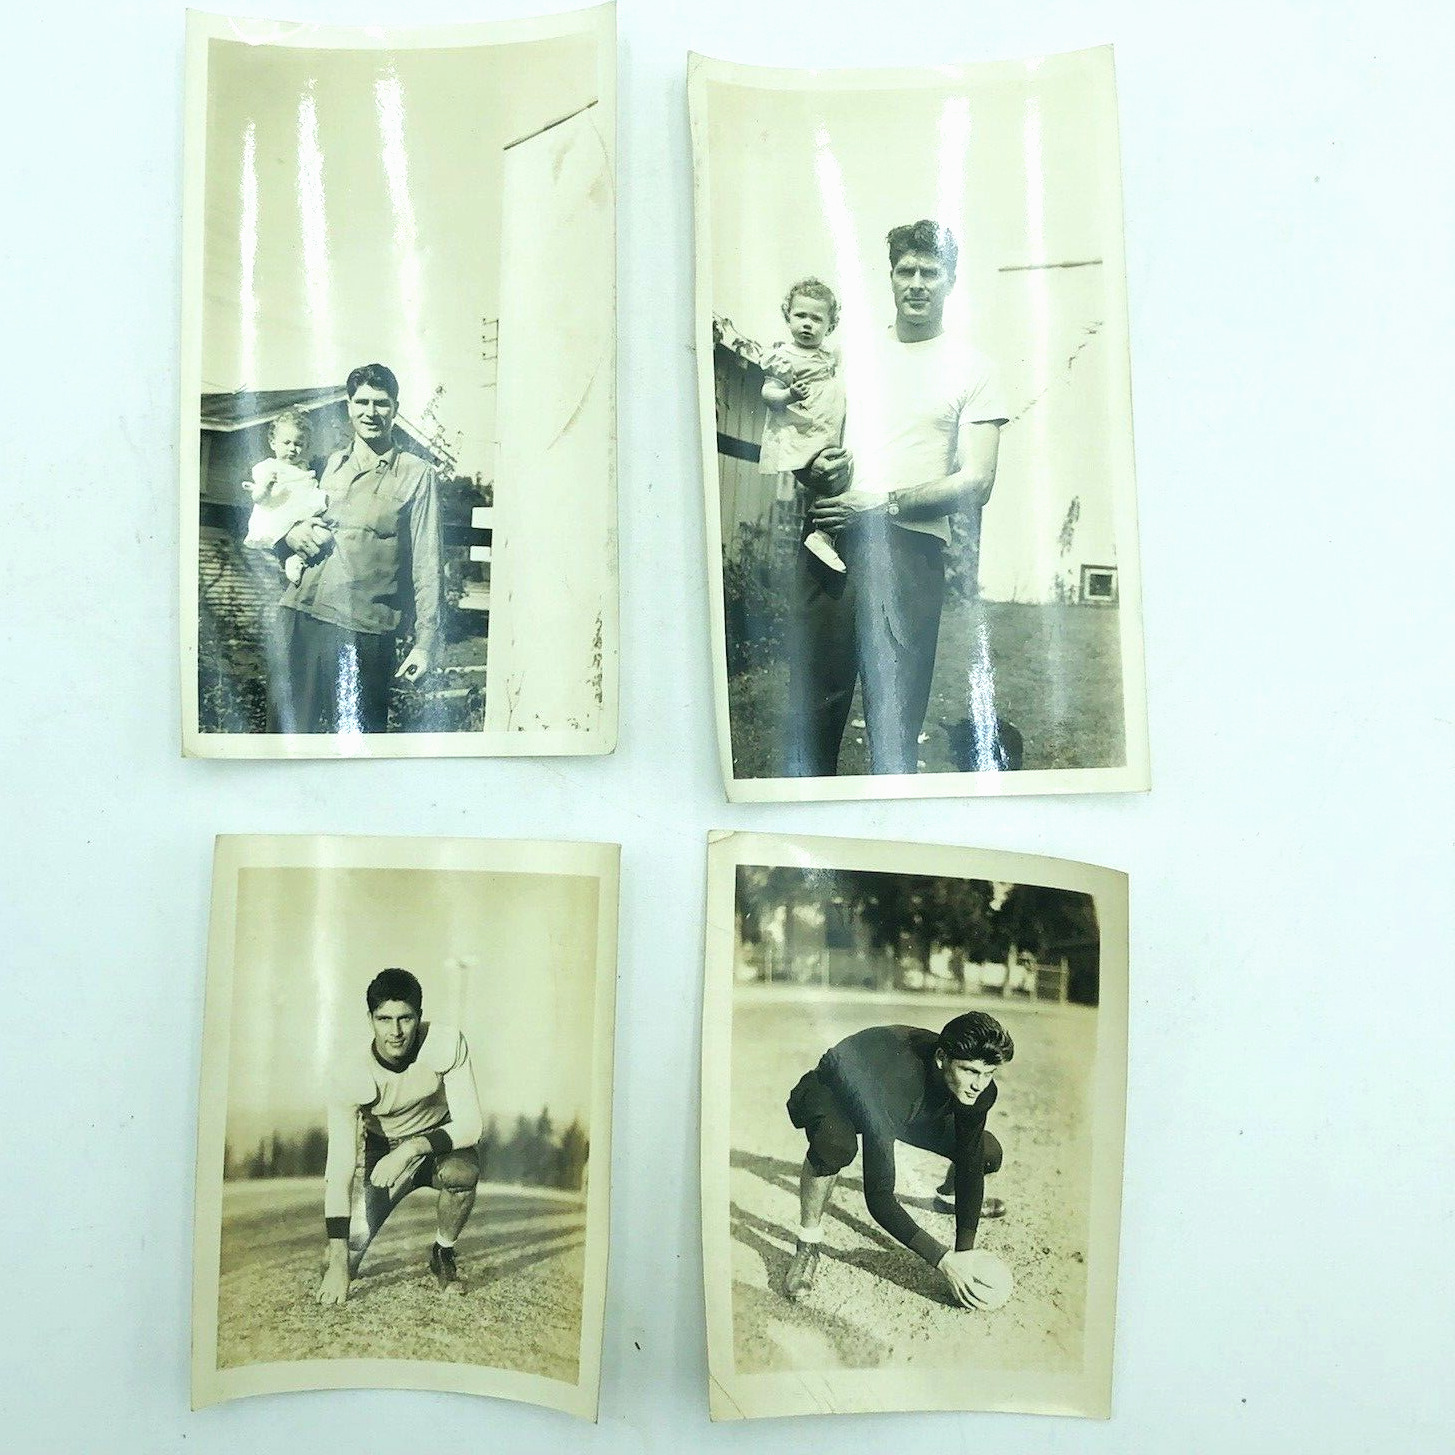 Antique Black and White Football Family Photos and School Pics